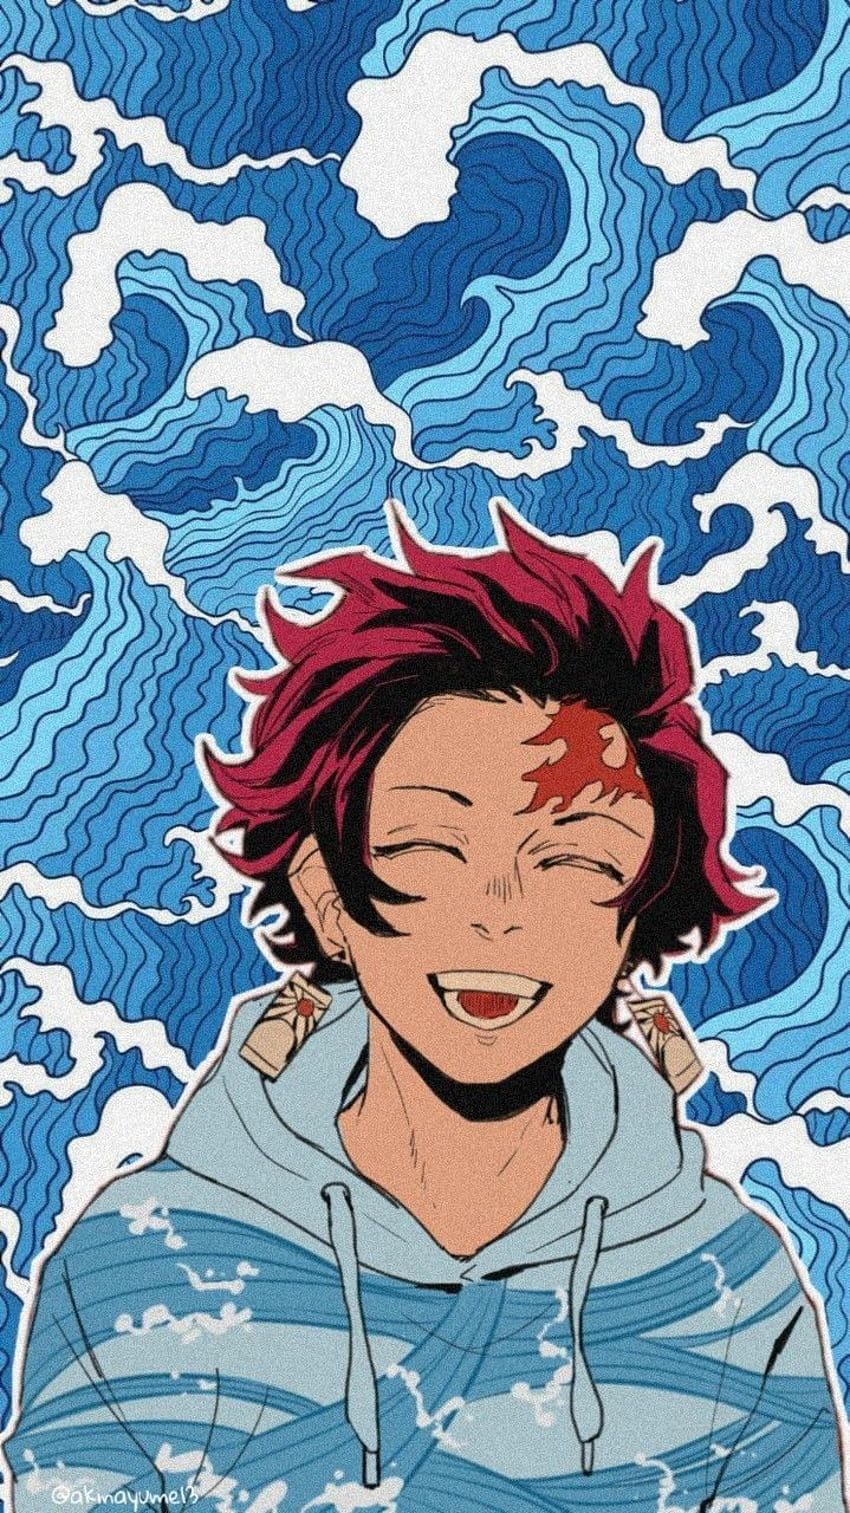 Anime wallpaper phone, image of anime boy with pink hair, wearing a hoodie, with blue waves in the background - Tanjiro Kamado